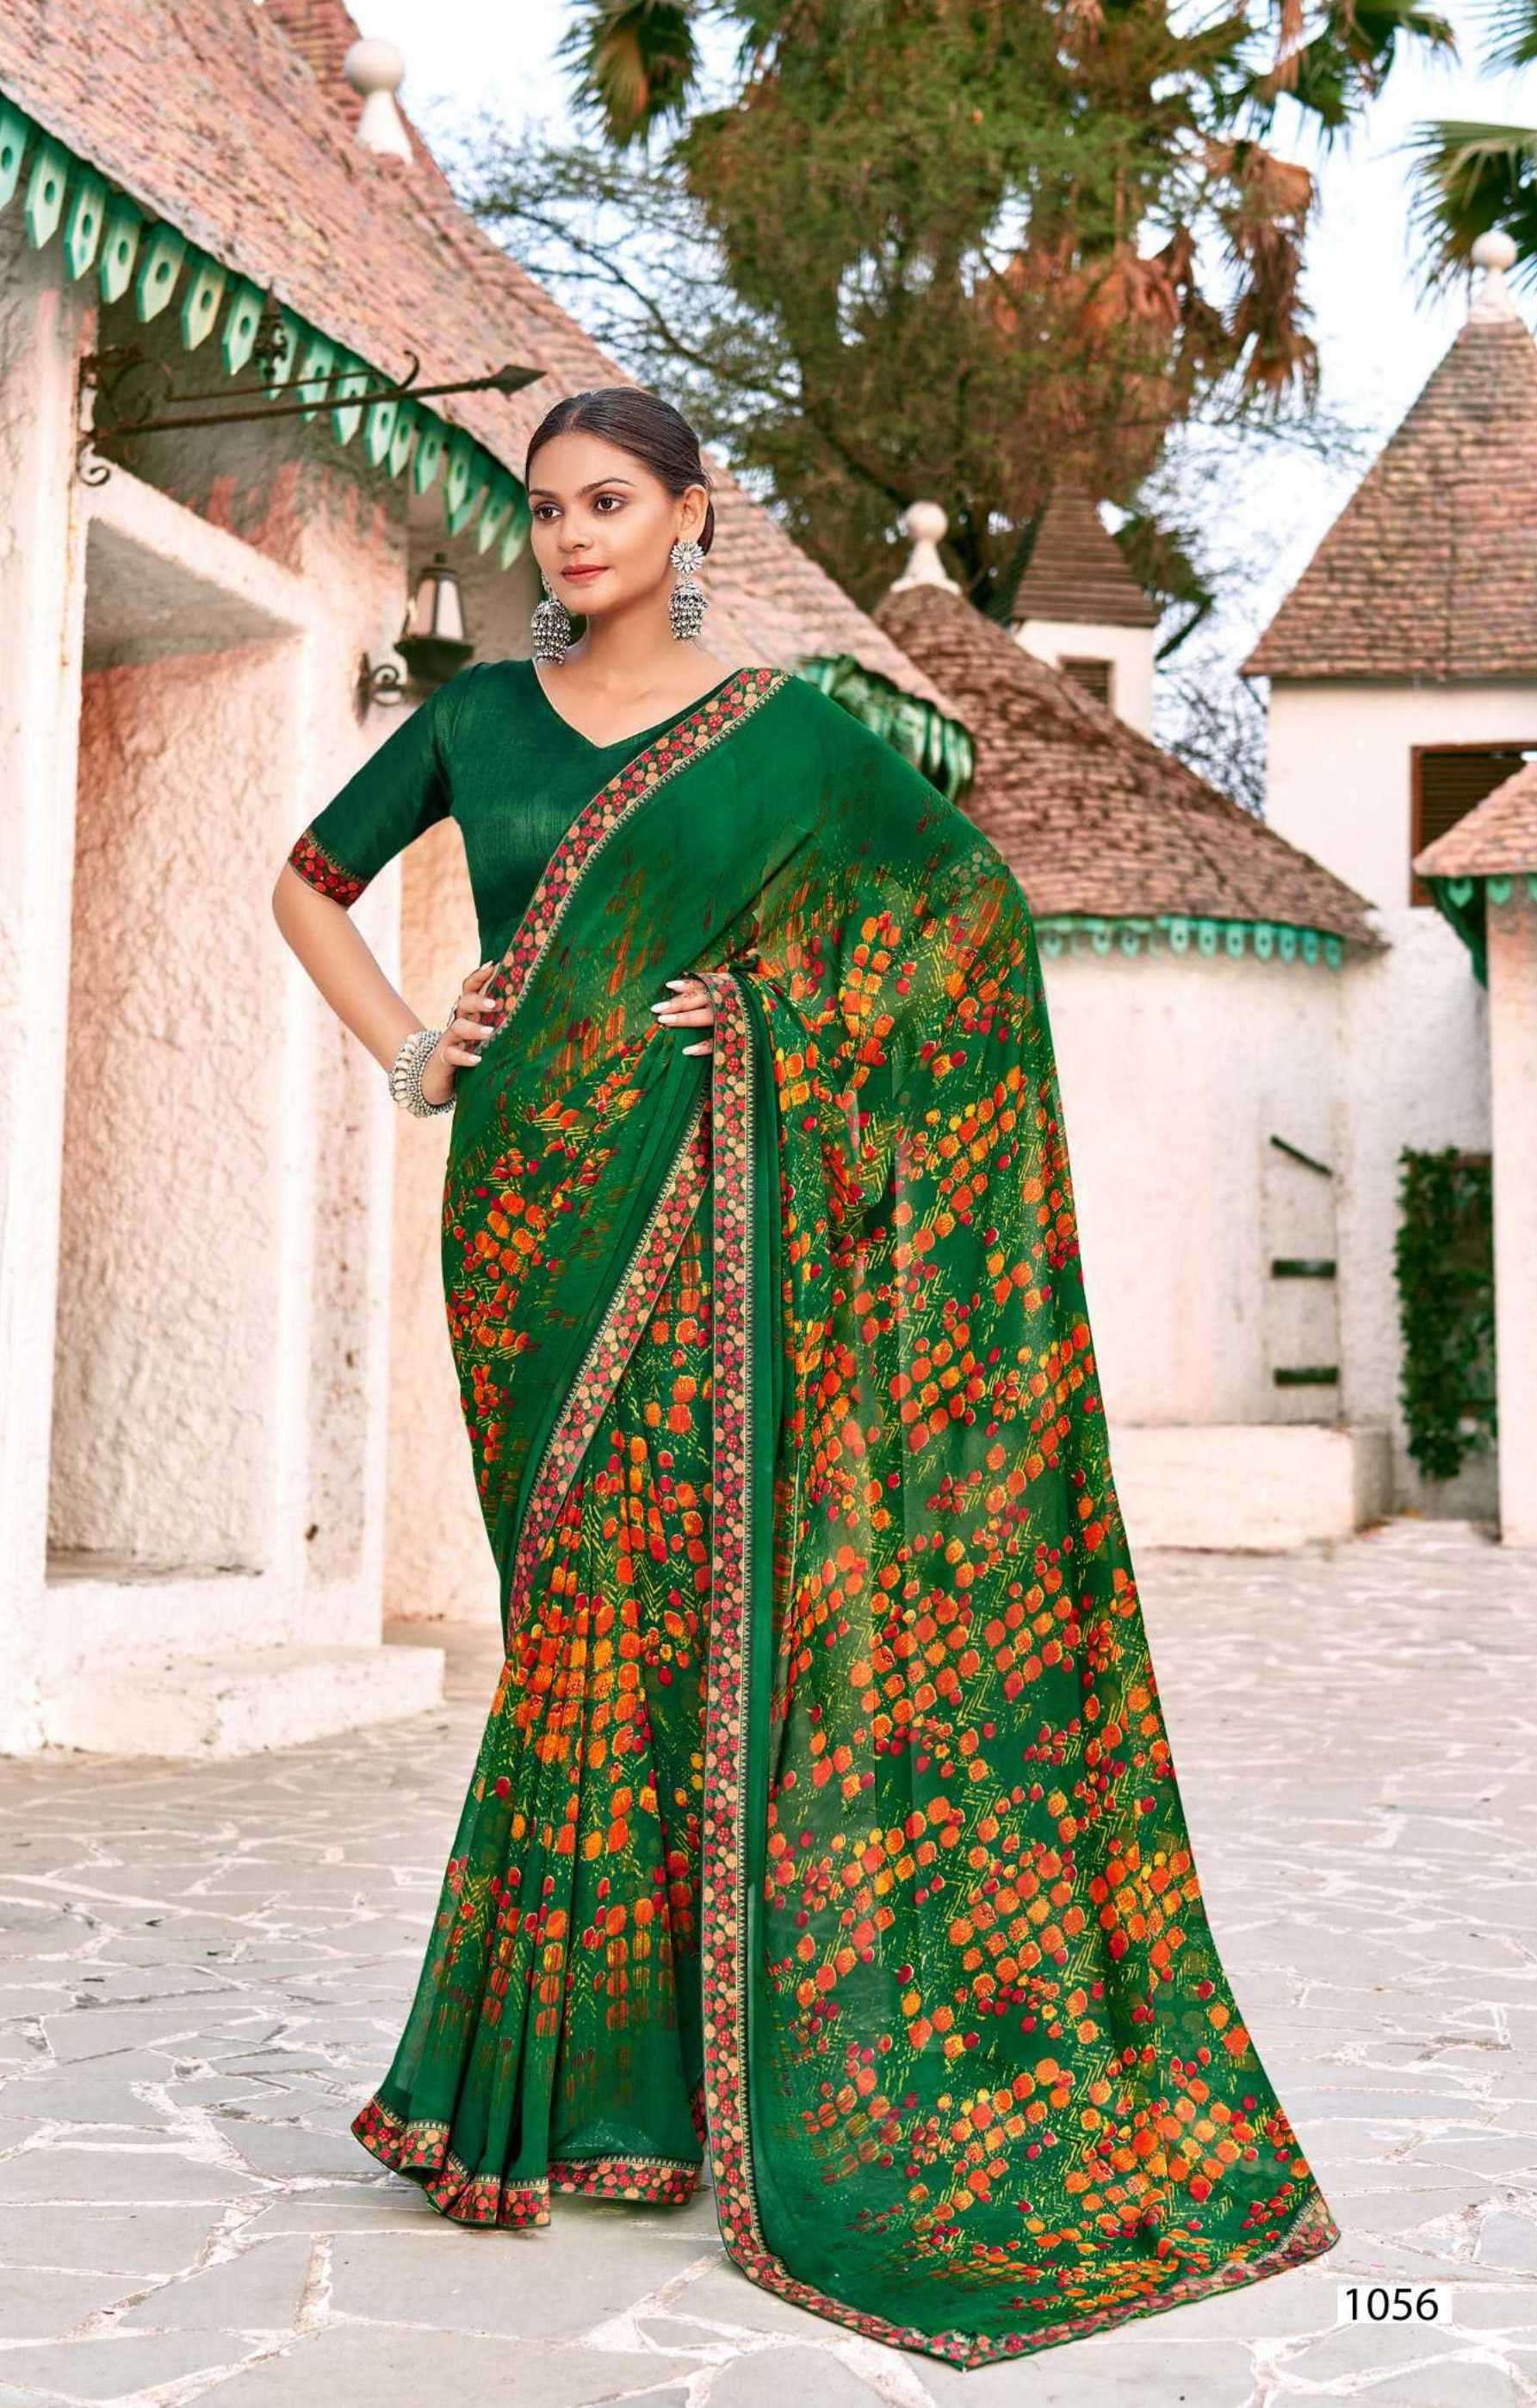 KANJAM SERIES 1051 TO 1058 SAREE BY VALLABHI PRINTS DESIGNER PRINTED GEORGETTE SAREES ARE AVAILABLE AT WHOLESALE PRICE